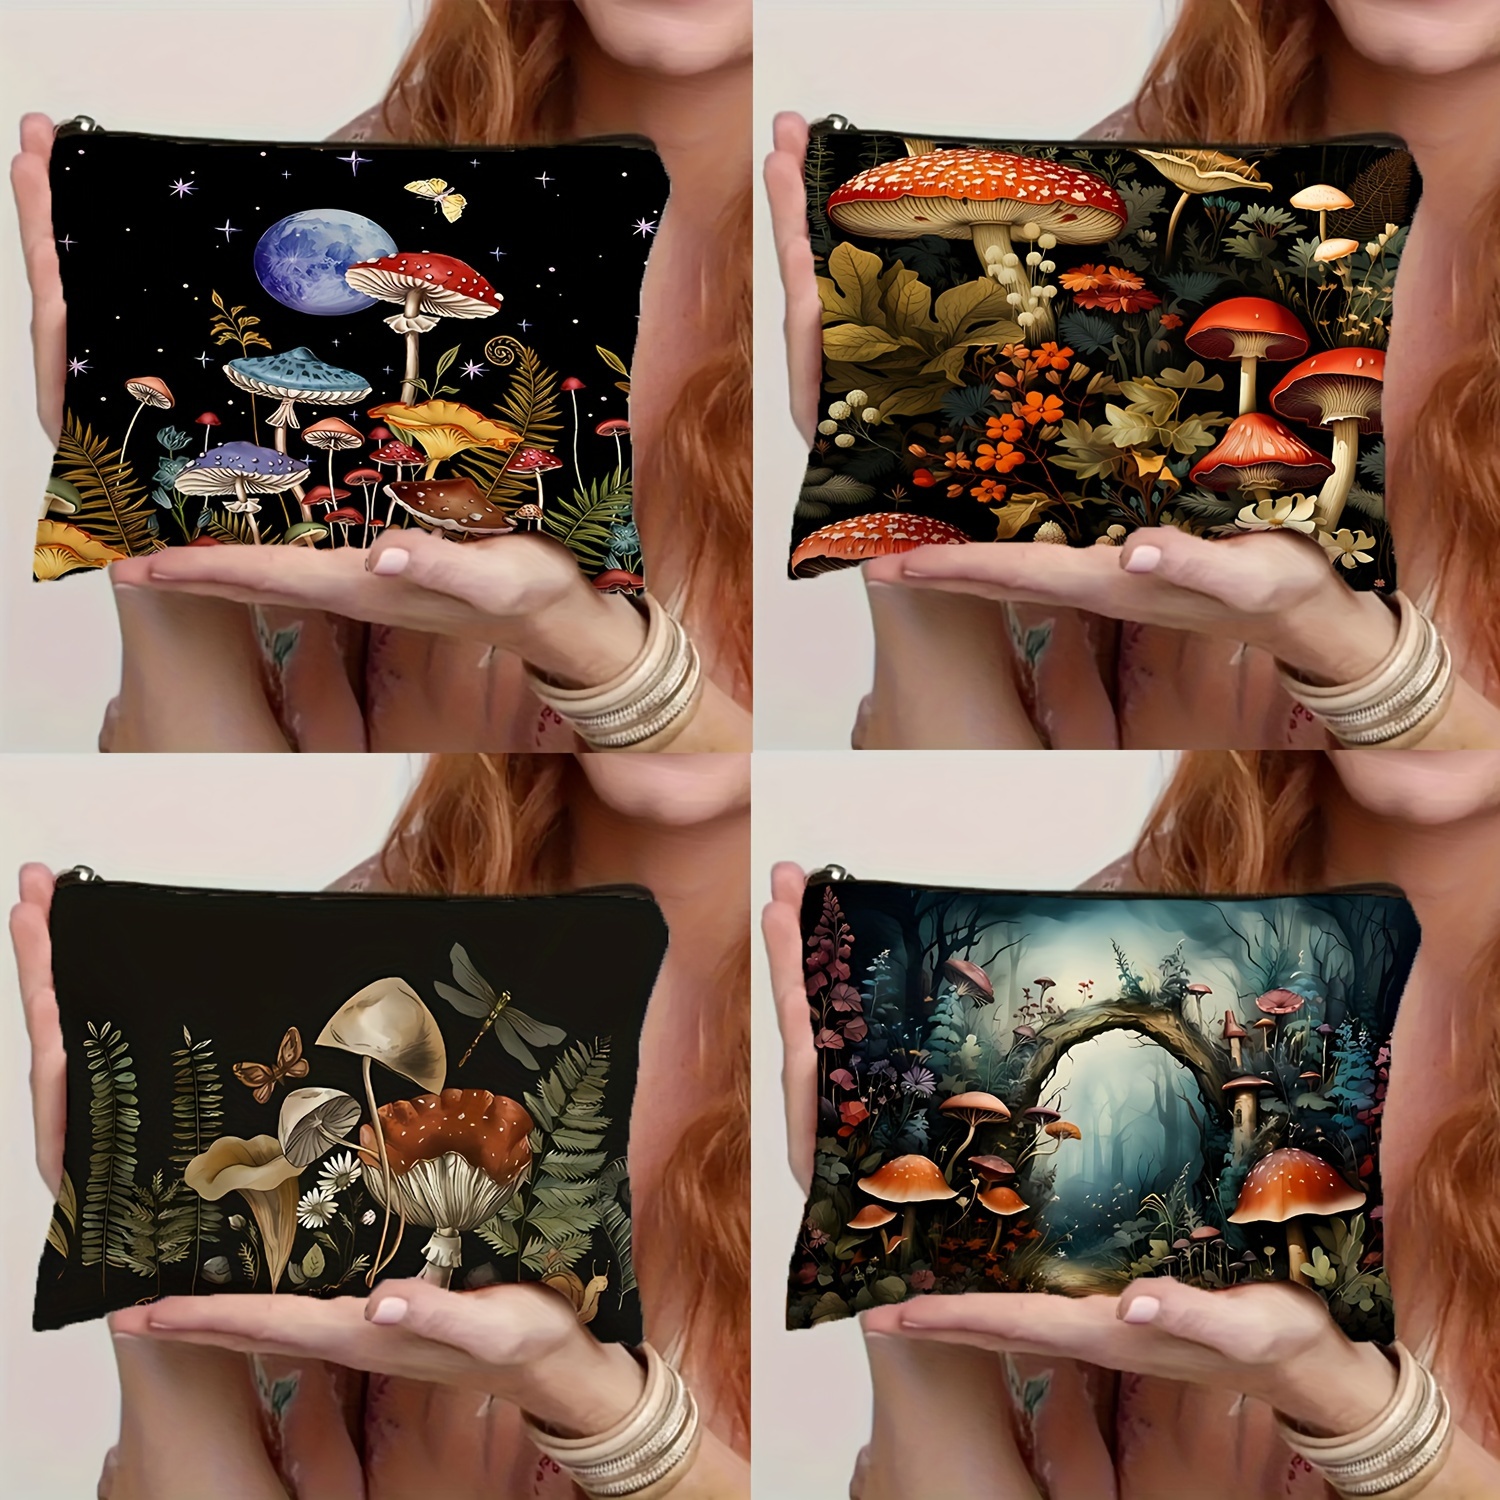 

1pc, Mushroom Forest Cosmetic Bag, Large Capacity Zippered Pouch For Women, Multi-functional Travel Makeup Organizer, Portable Toiletry Handbag, Ideal For Festive Birthday Gifts